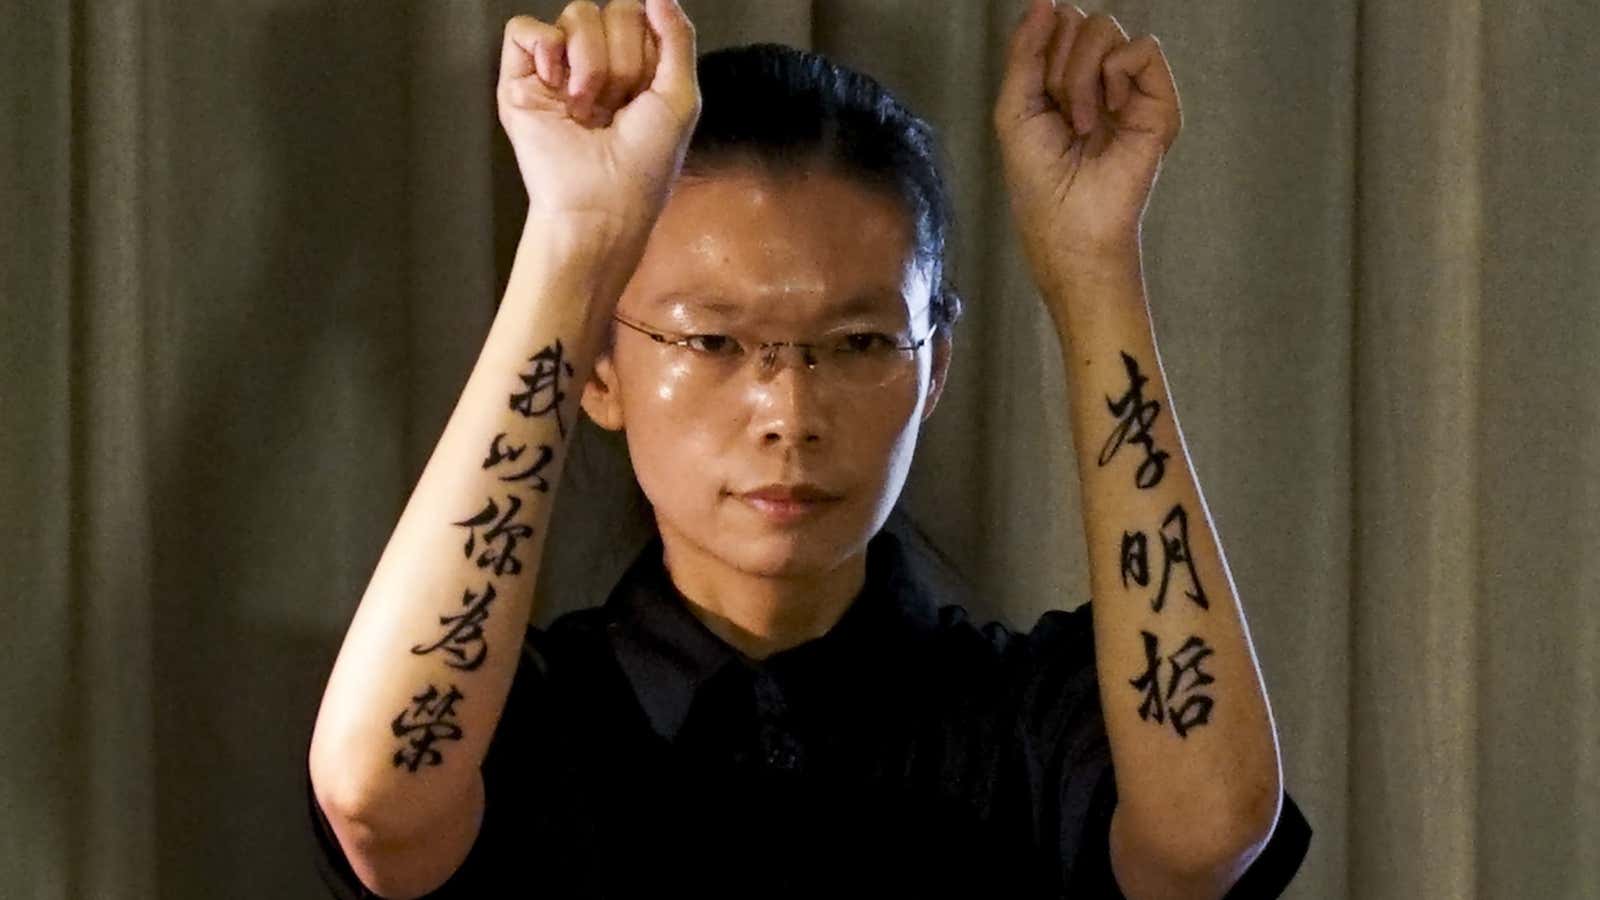 Lee Ming-che’s wife with tattoos on her arms that say: “Lee Ming-Che, I’m proud of you.”